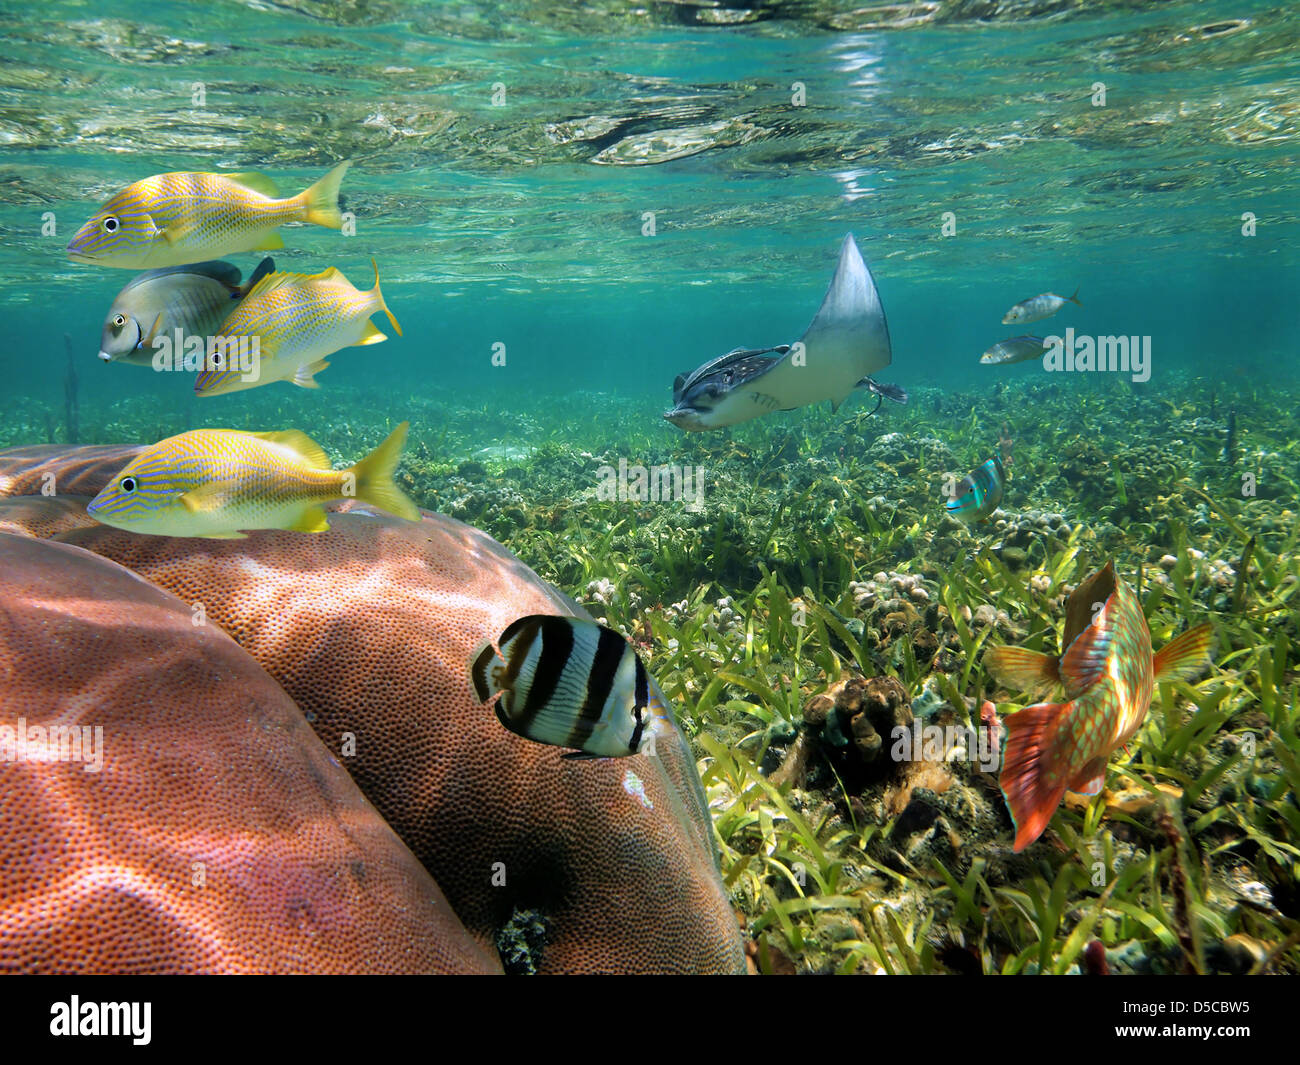 Tropical fish and coral with an eagle ray underwater, Caribbean sea Stock Photo